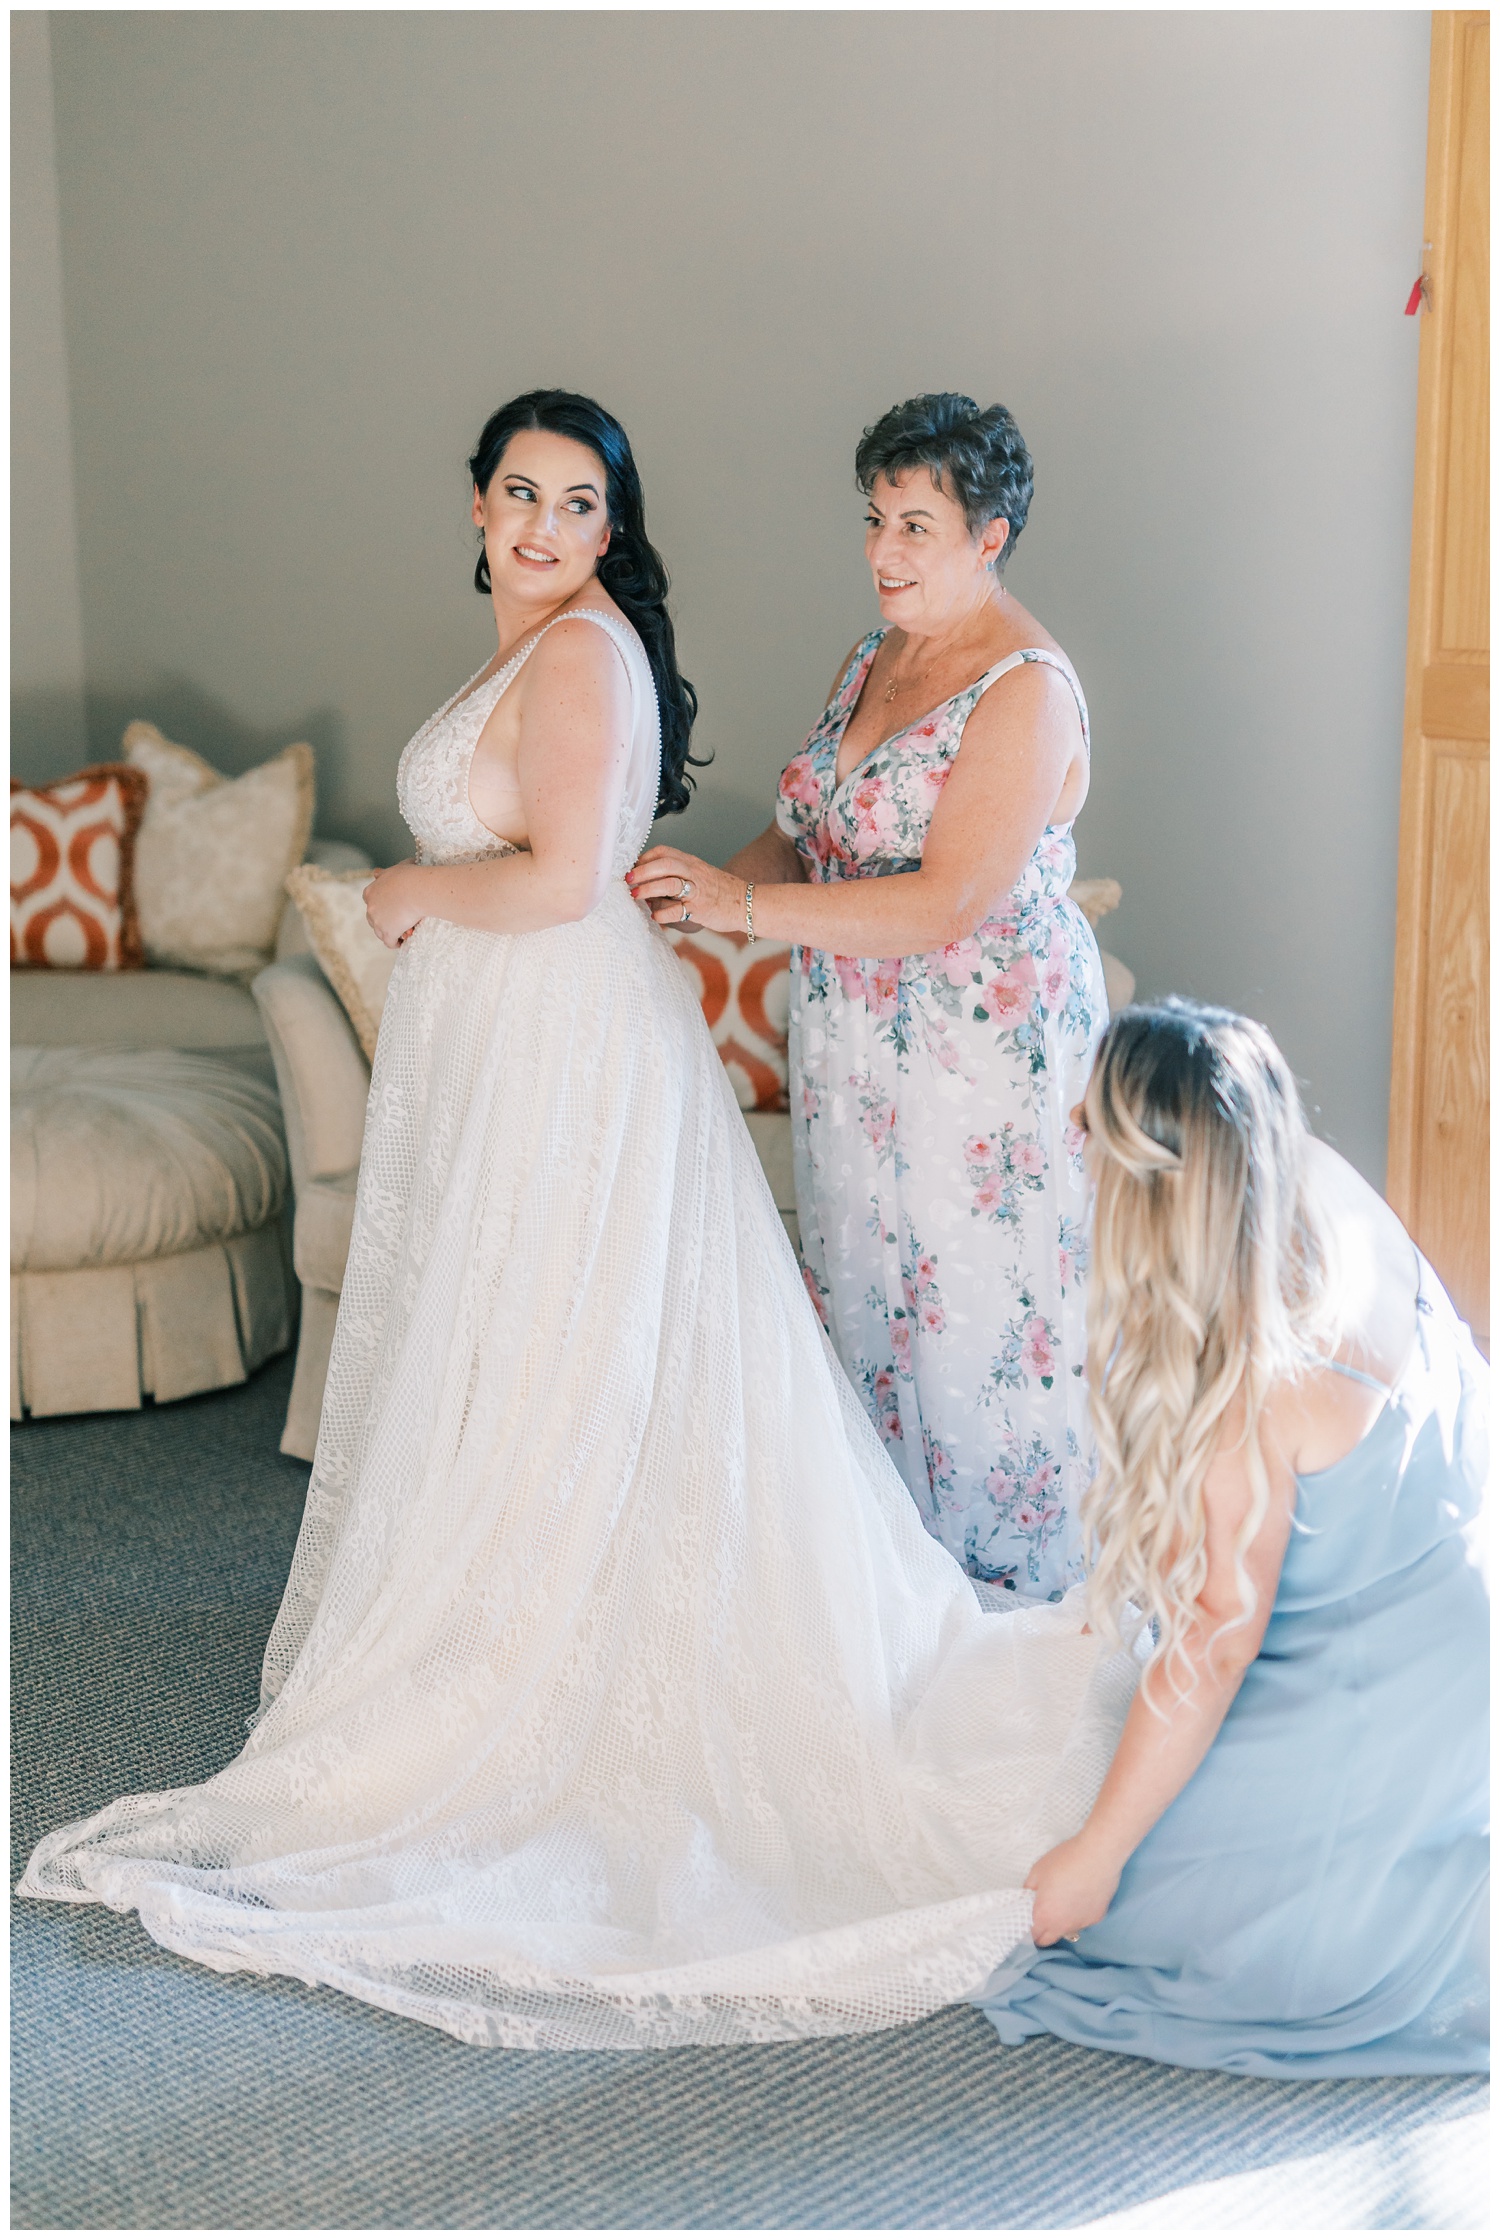 Mother and bridesmaid helping bride put her dress on